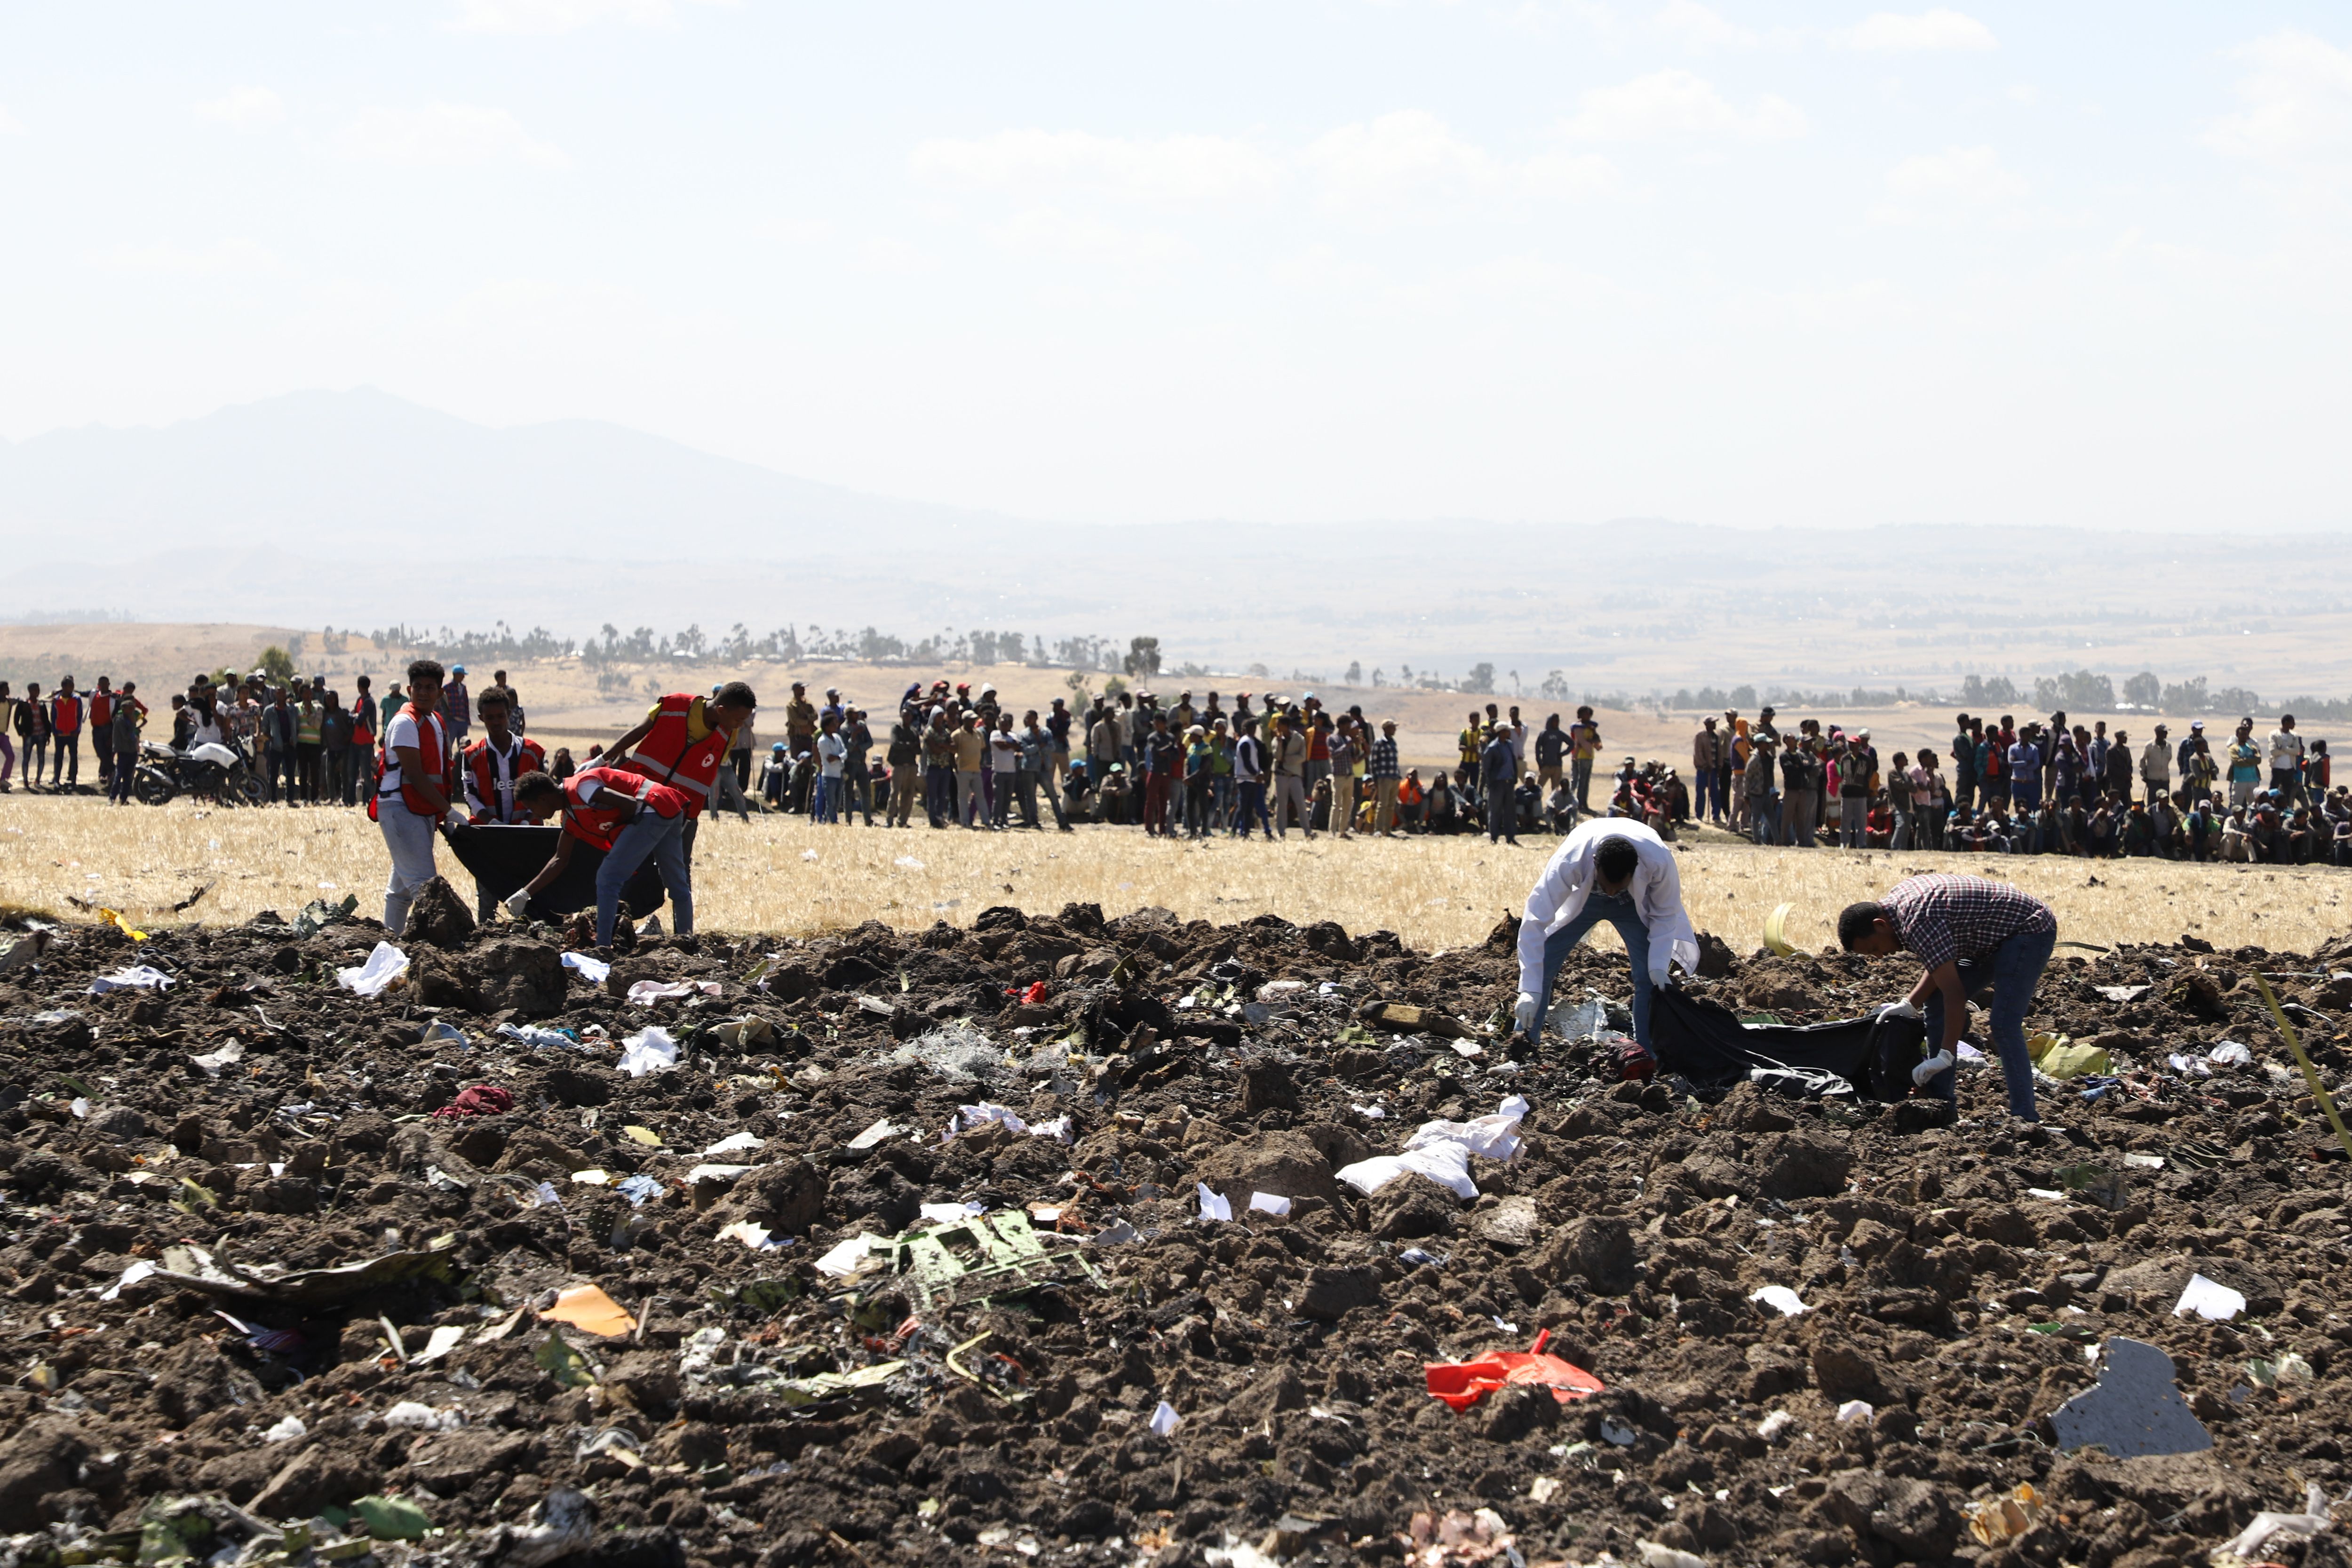 Rescue teams collect remains of bodies amid debris at the crash site of Ethiopia Airlines near Bishoftu, a town some 60 kilometres southeast of Addis Ababa, Ethiopia, on March 10, 2019.